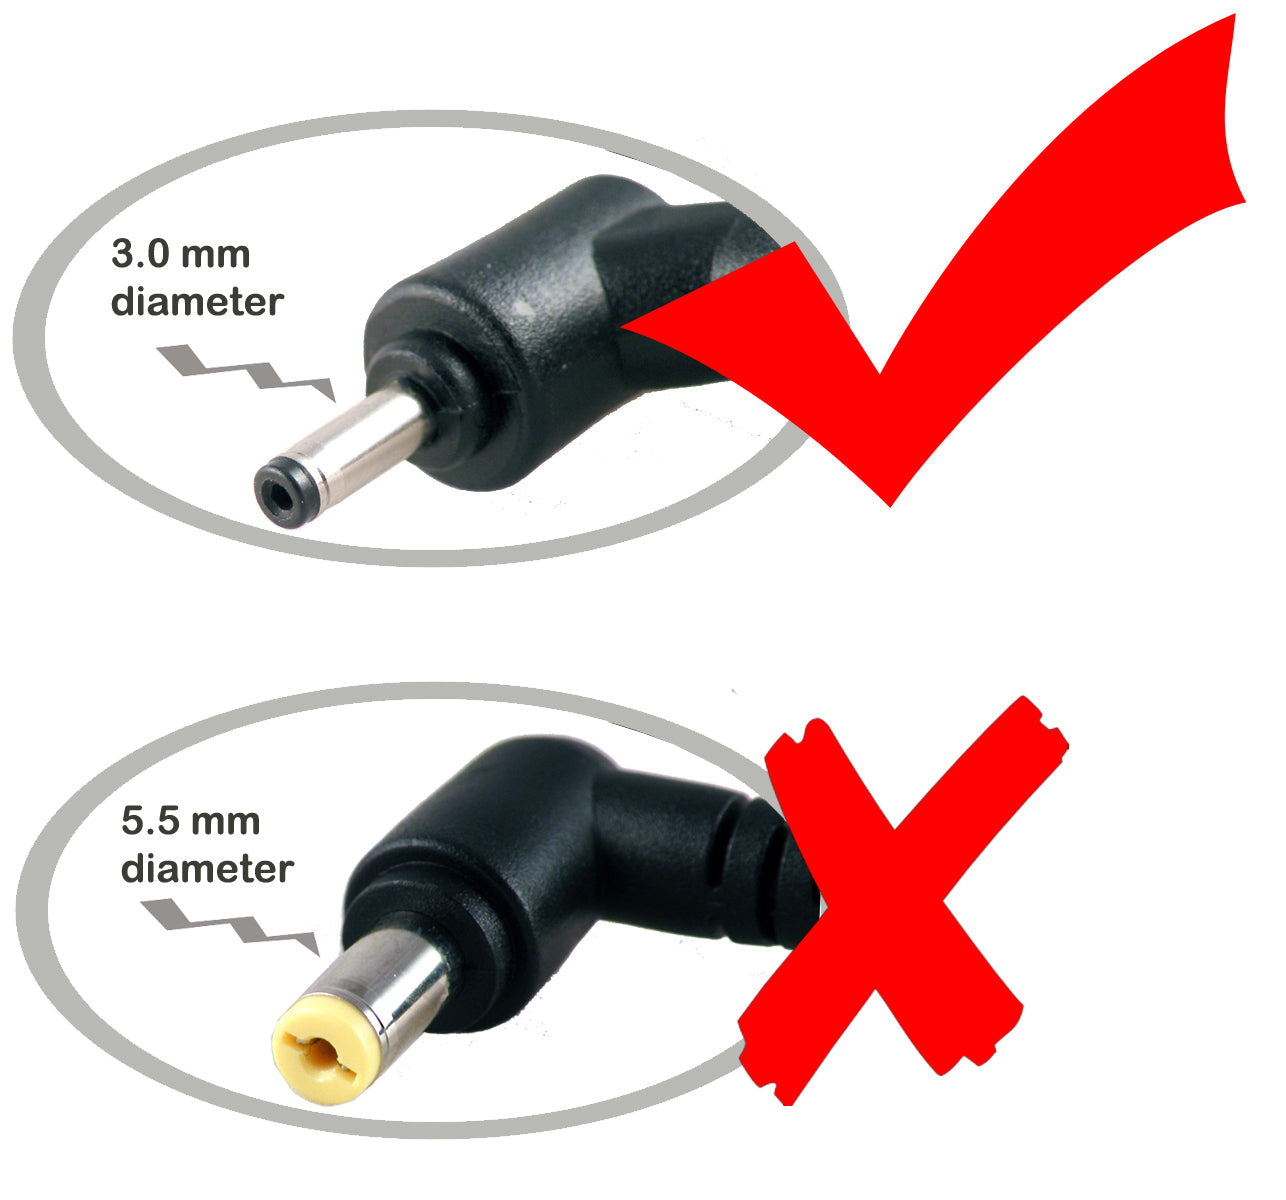 Tip comparison of the adapter DC plugs